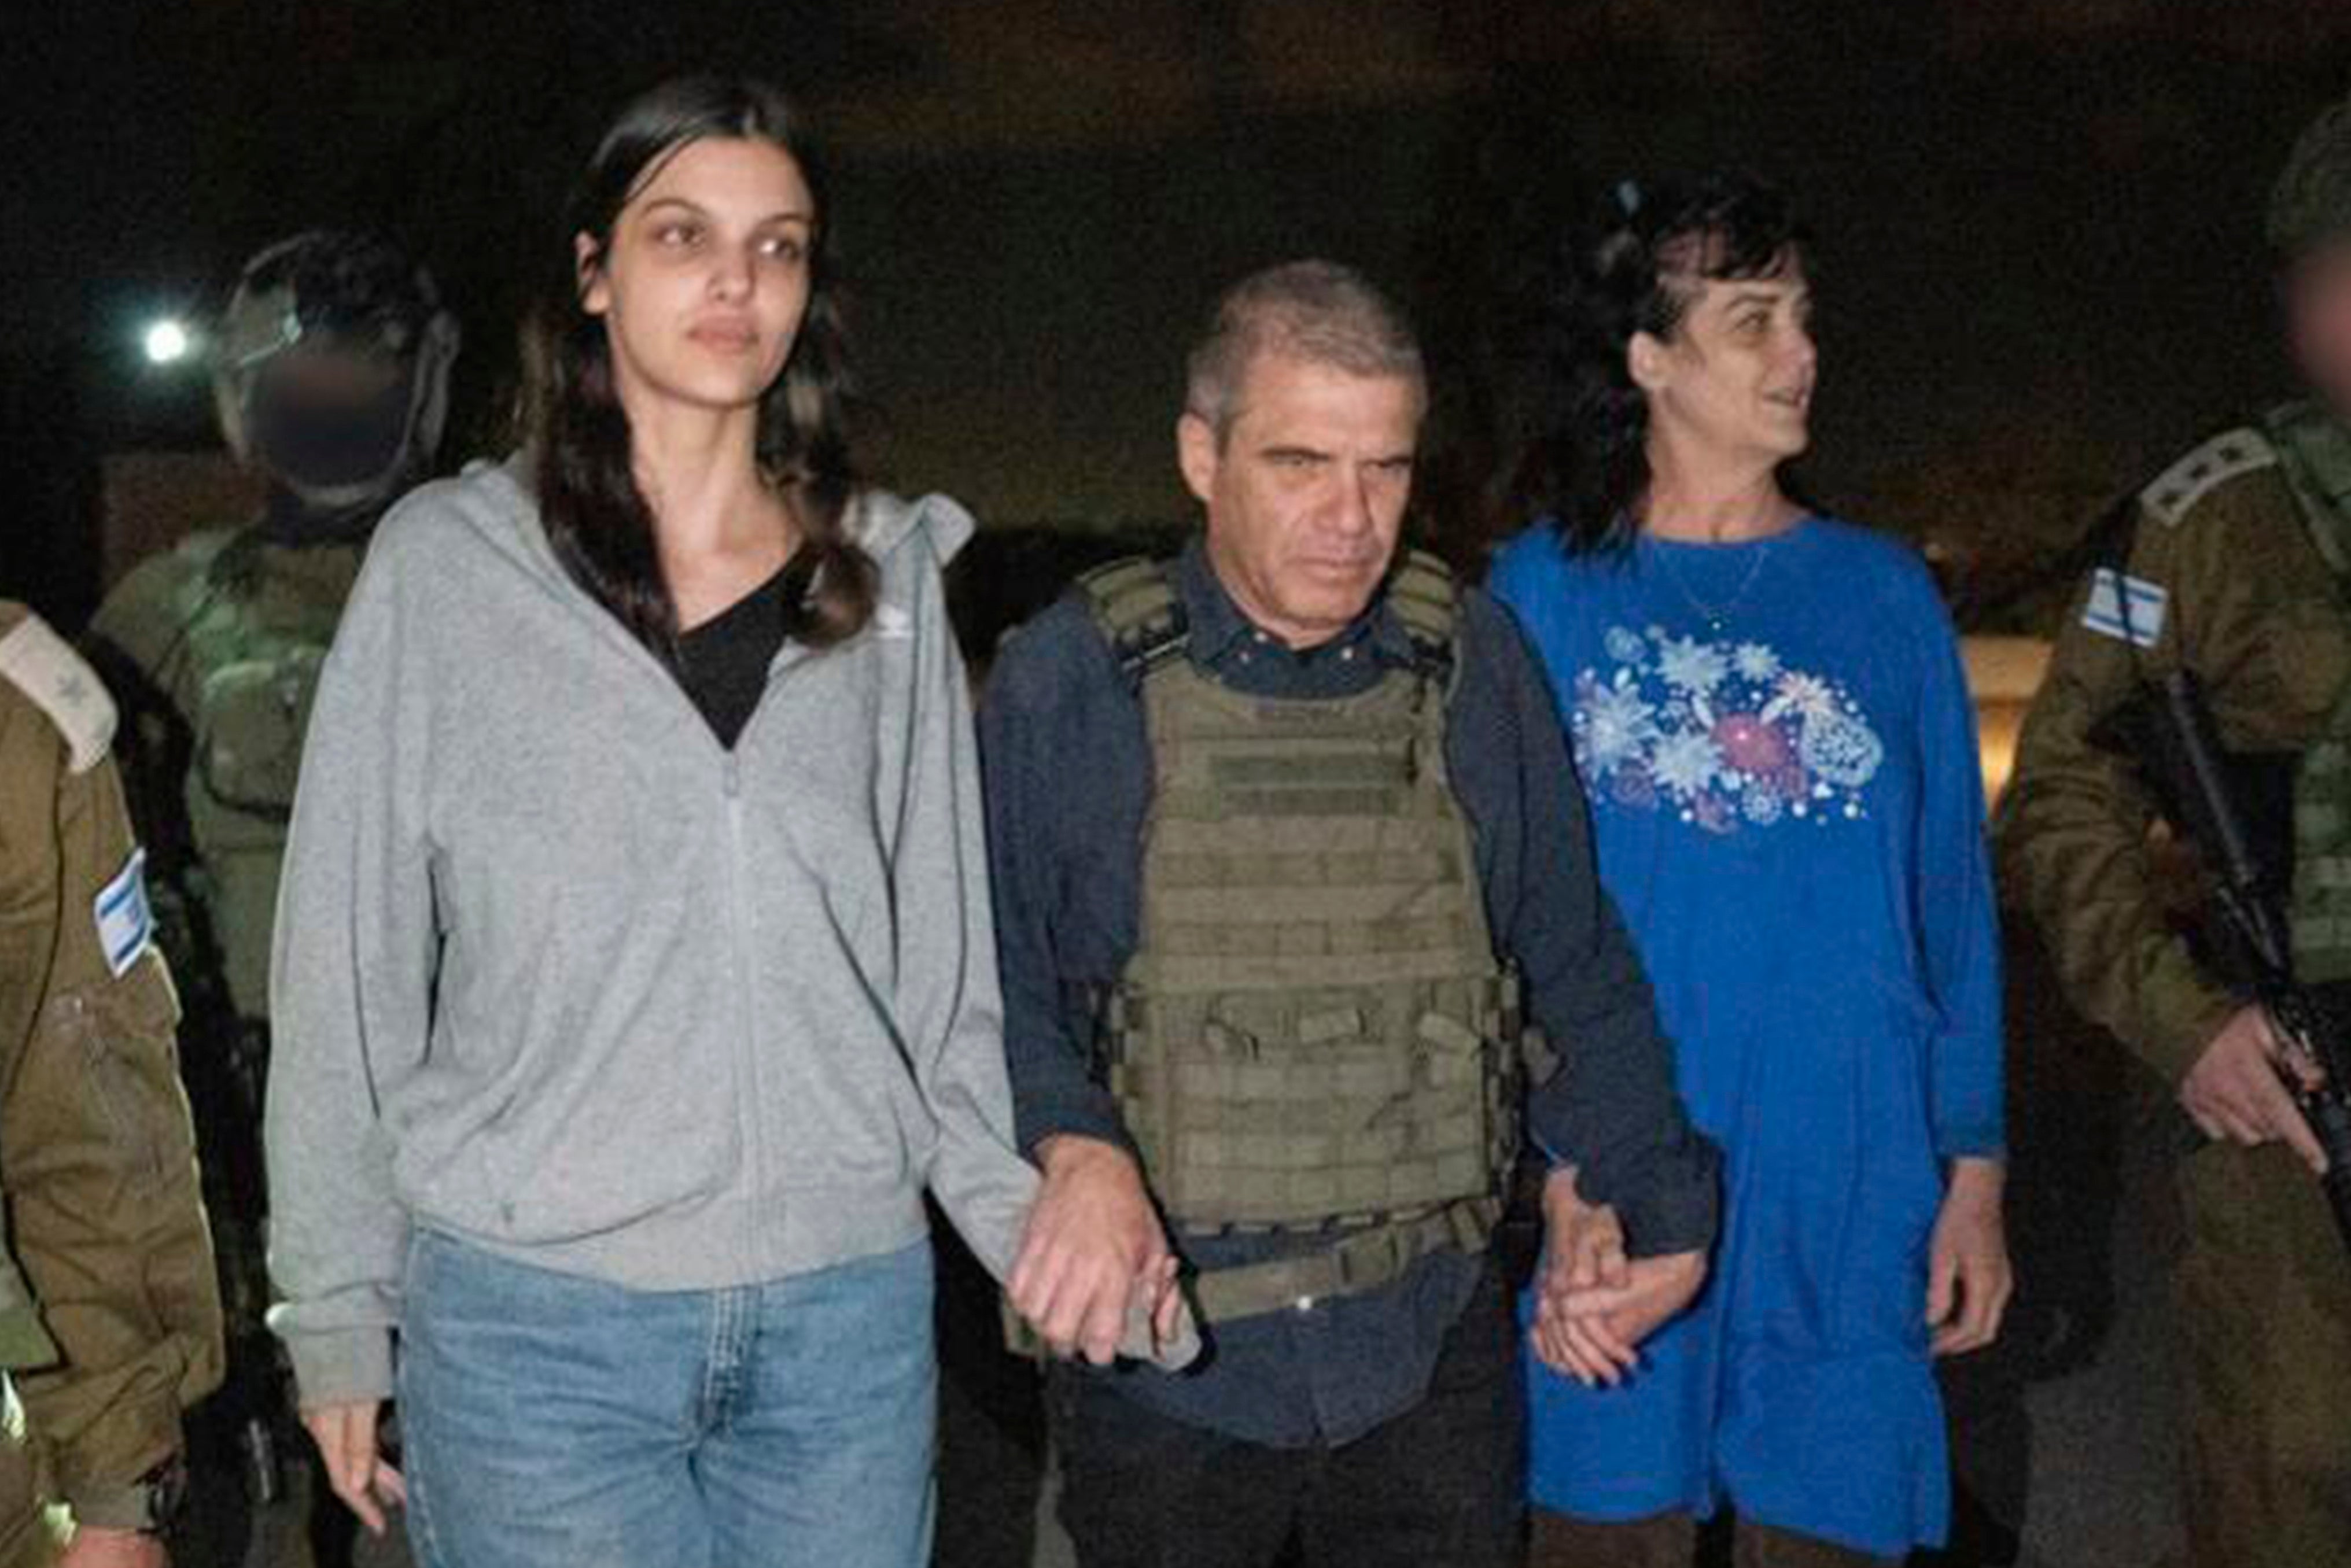 Judith Raanan, right, and her 17-year-old daughter Natalie are escorted by Israeli soldiers and Gal Hirsch, Prime Minister Benjamin Netanyahu's special coordinator for returning the hostages, as they return to Israel from captivity in the Gaza Strip